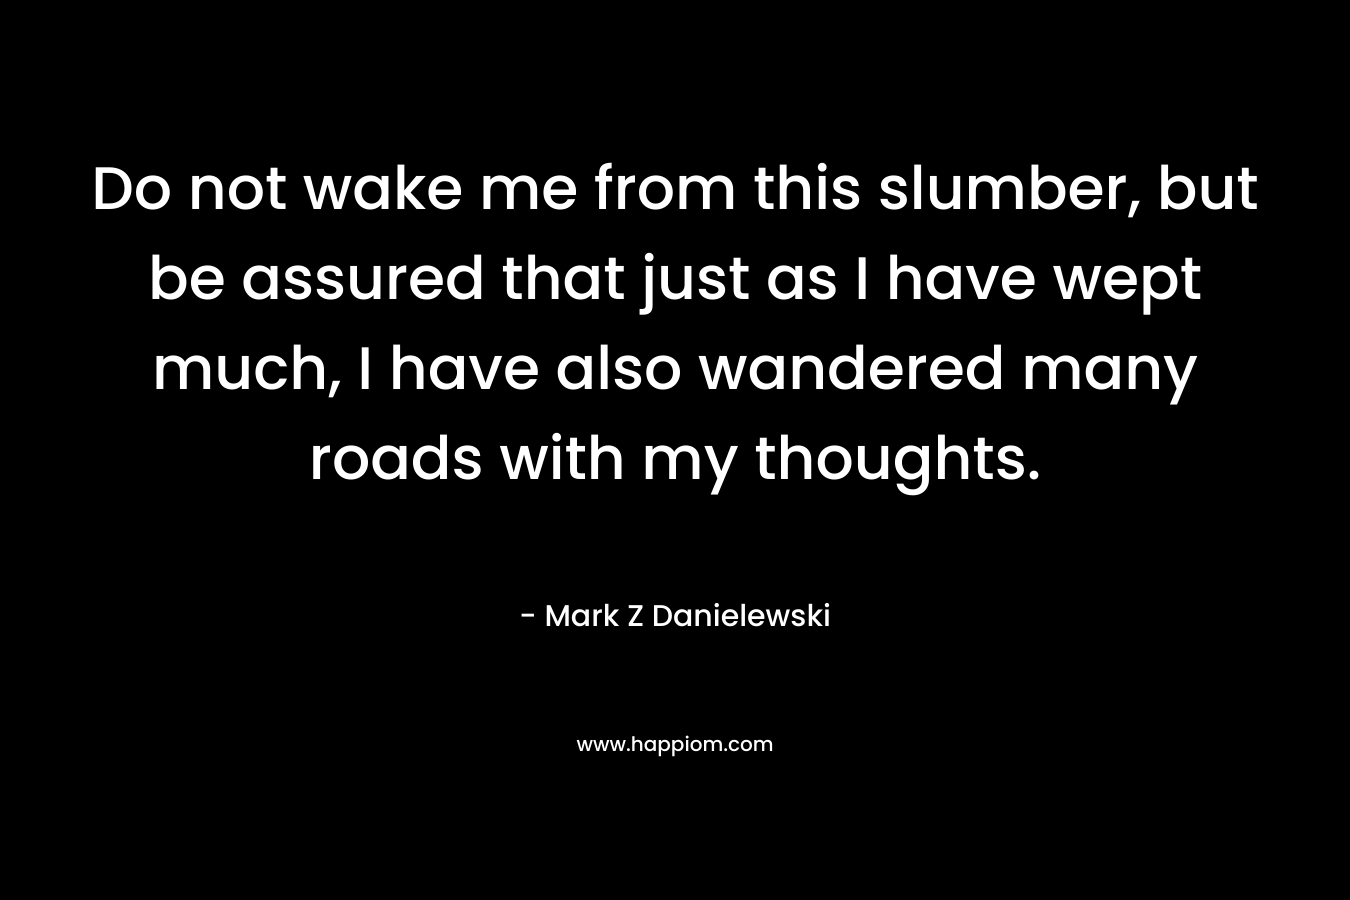 Do not wake me from this slumber, but be assured that just as I have wept much, I have also wandered many roads with my thoughts.